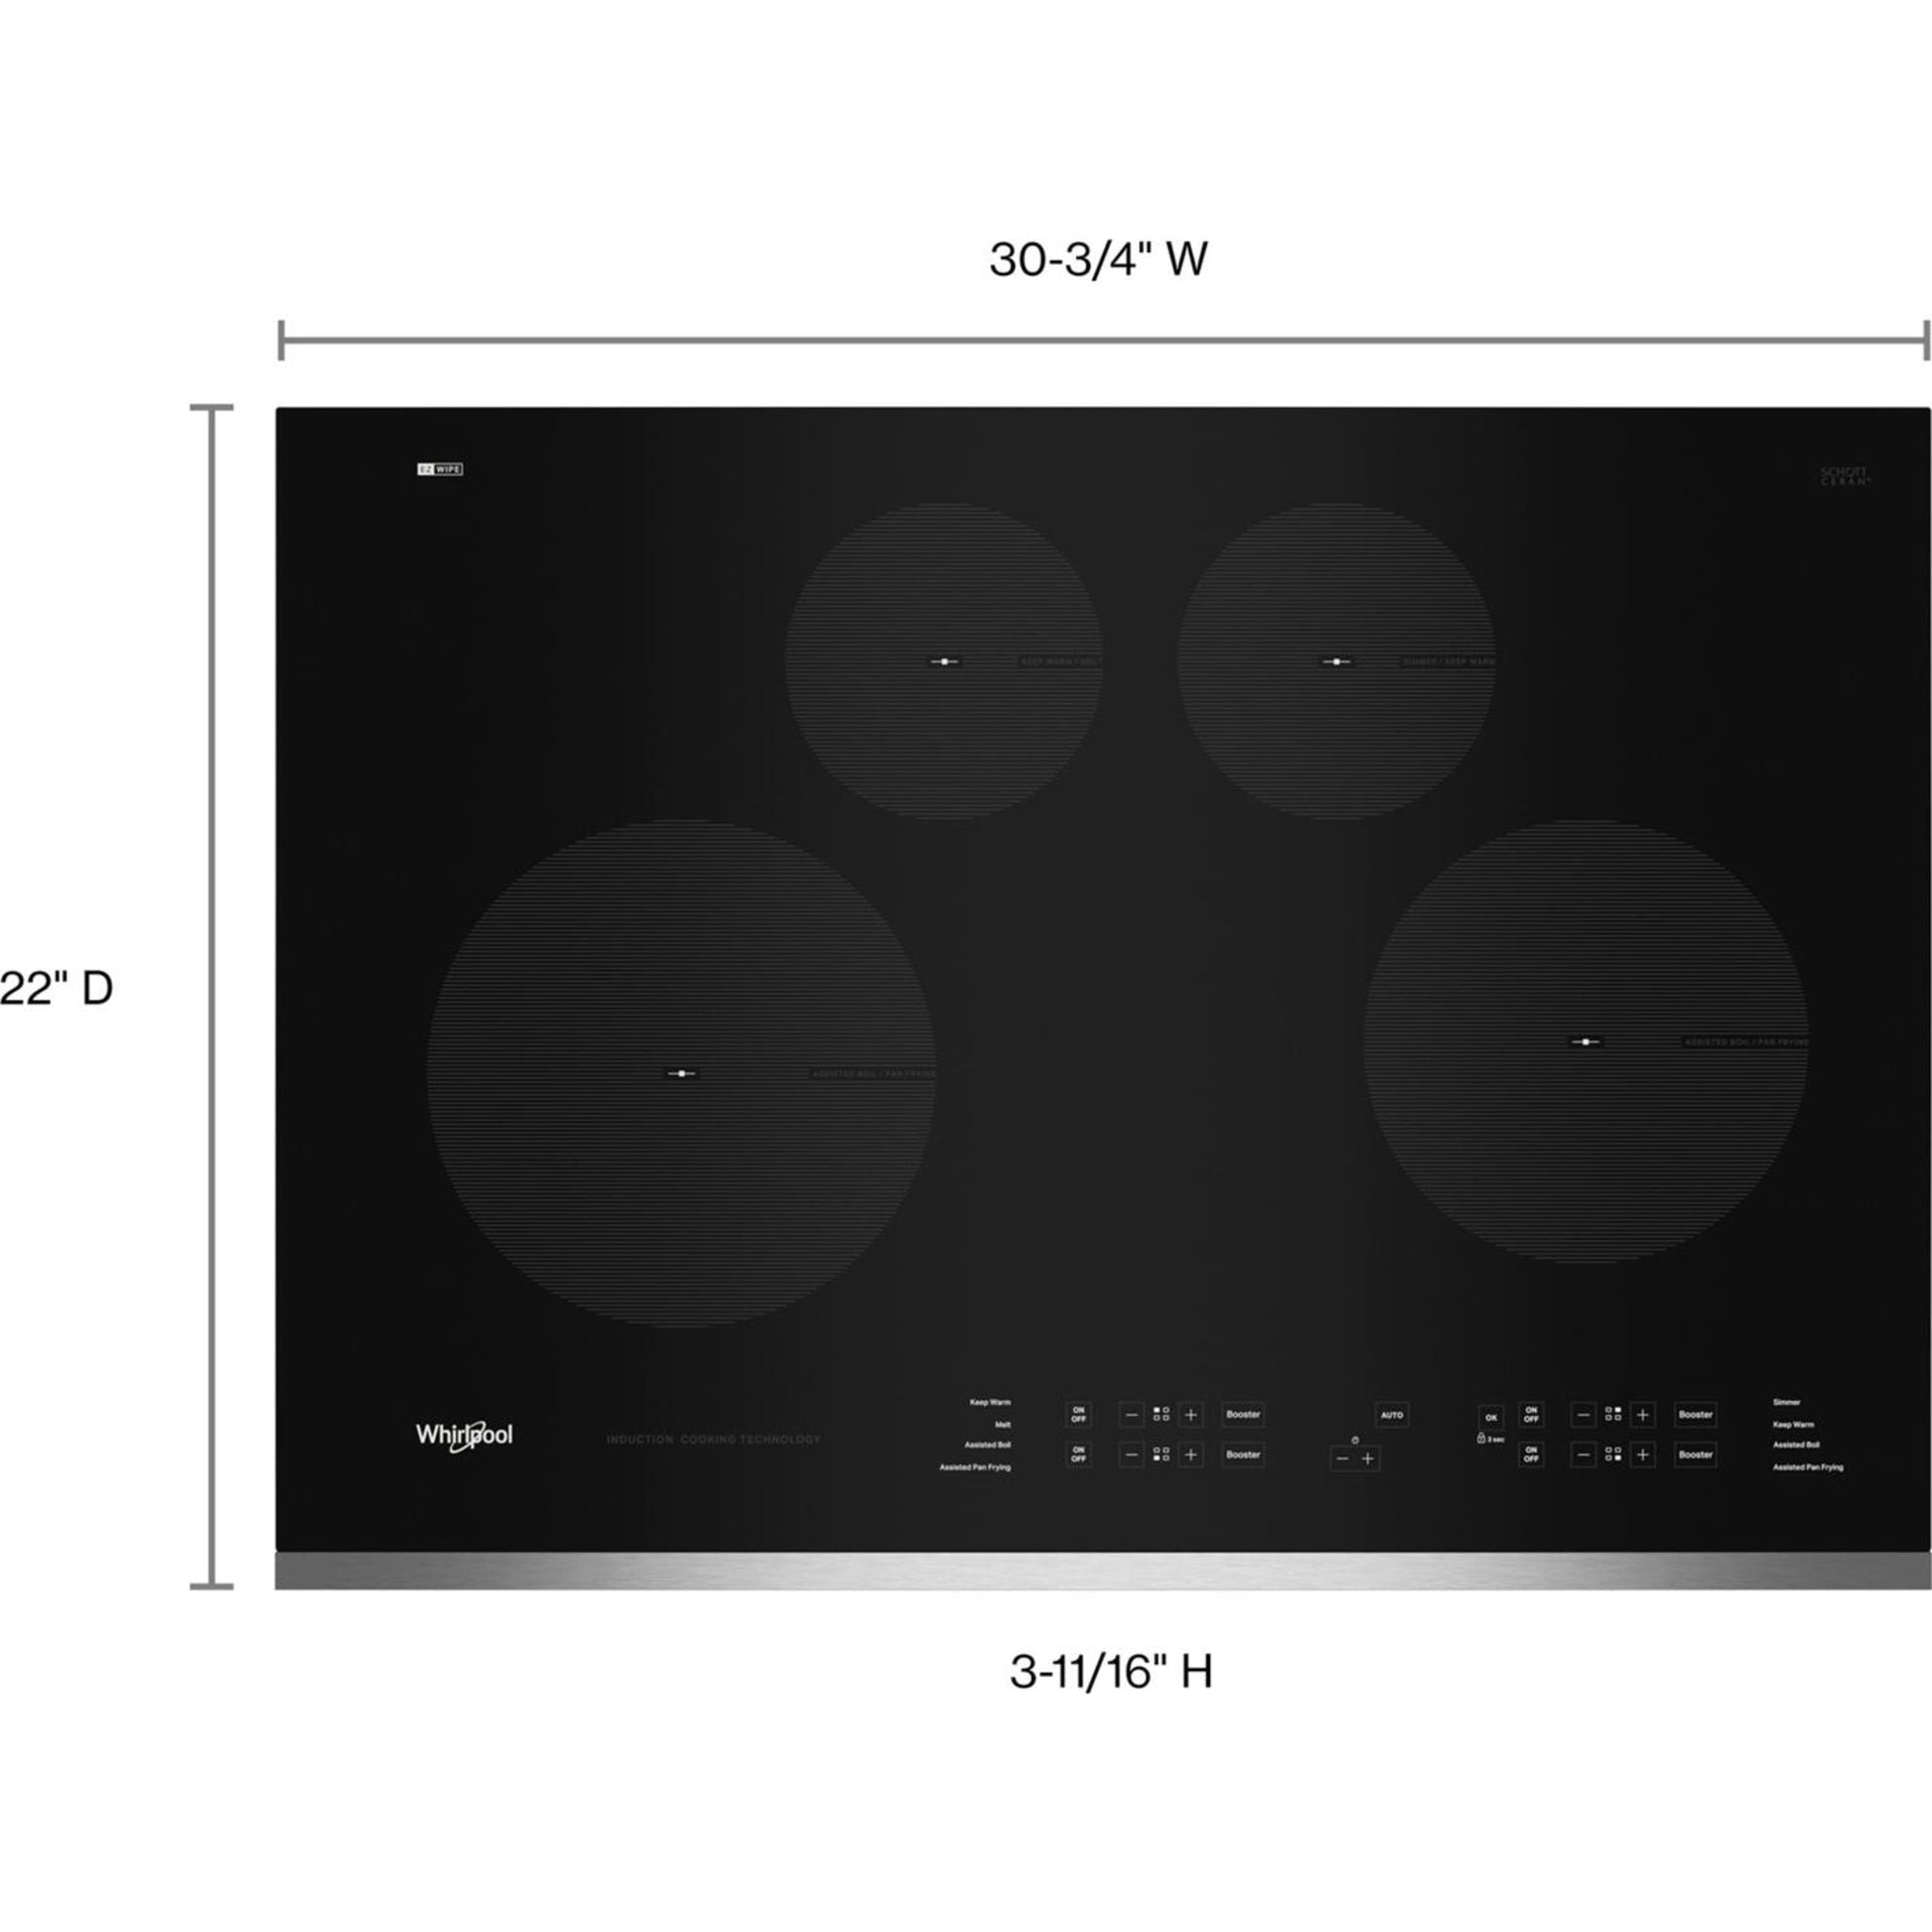 Whirlpool 30" Cooktop (WCI55US0JS) - Stainless Steel